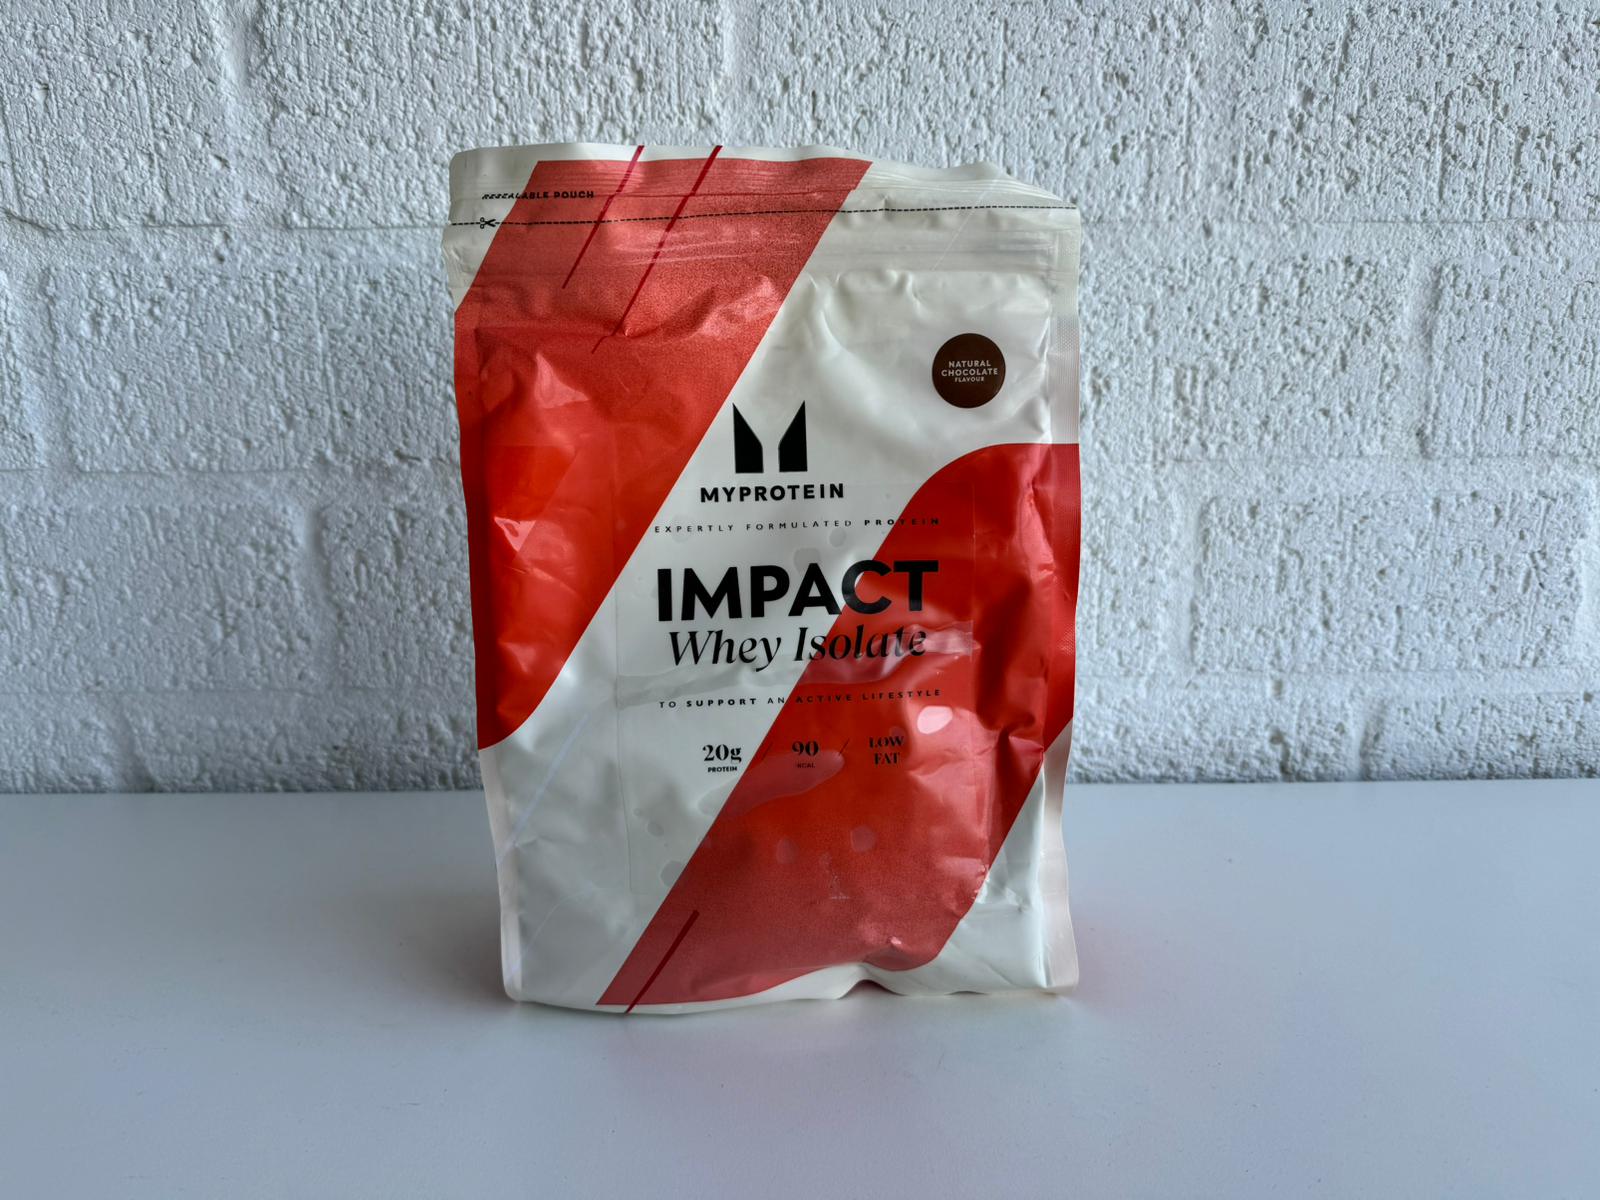 Impact Whey Isolate review